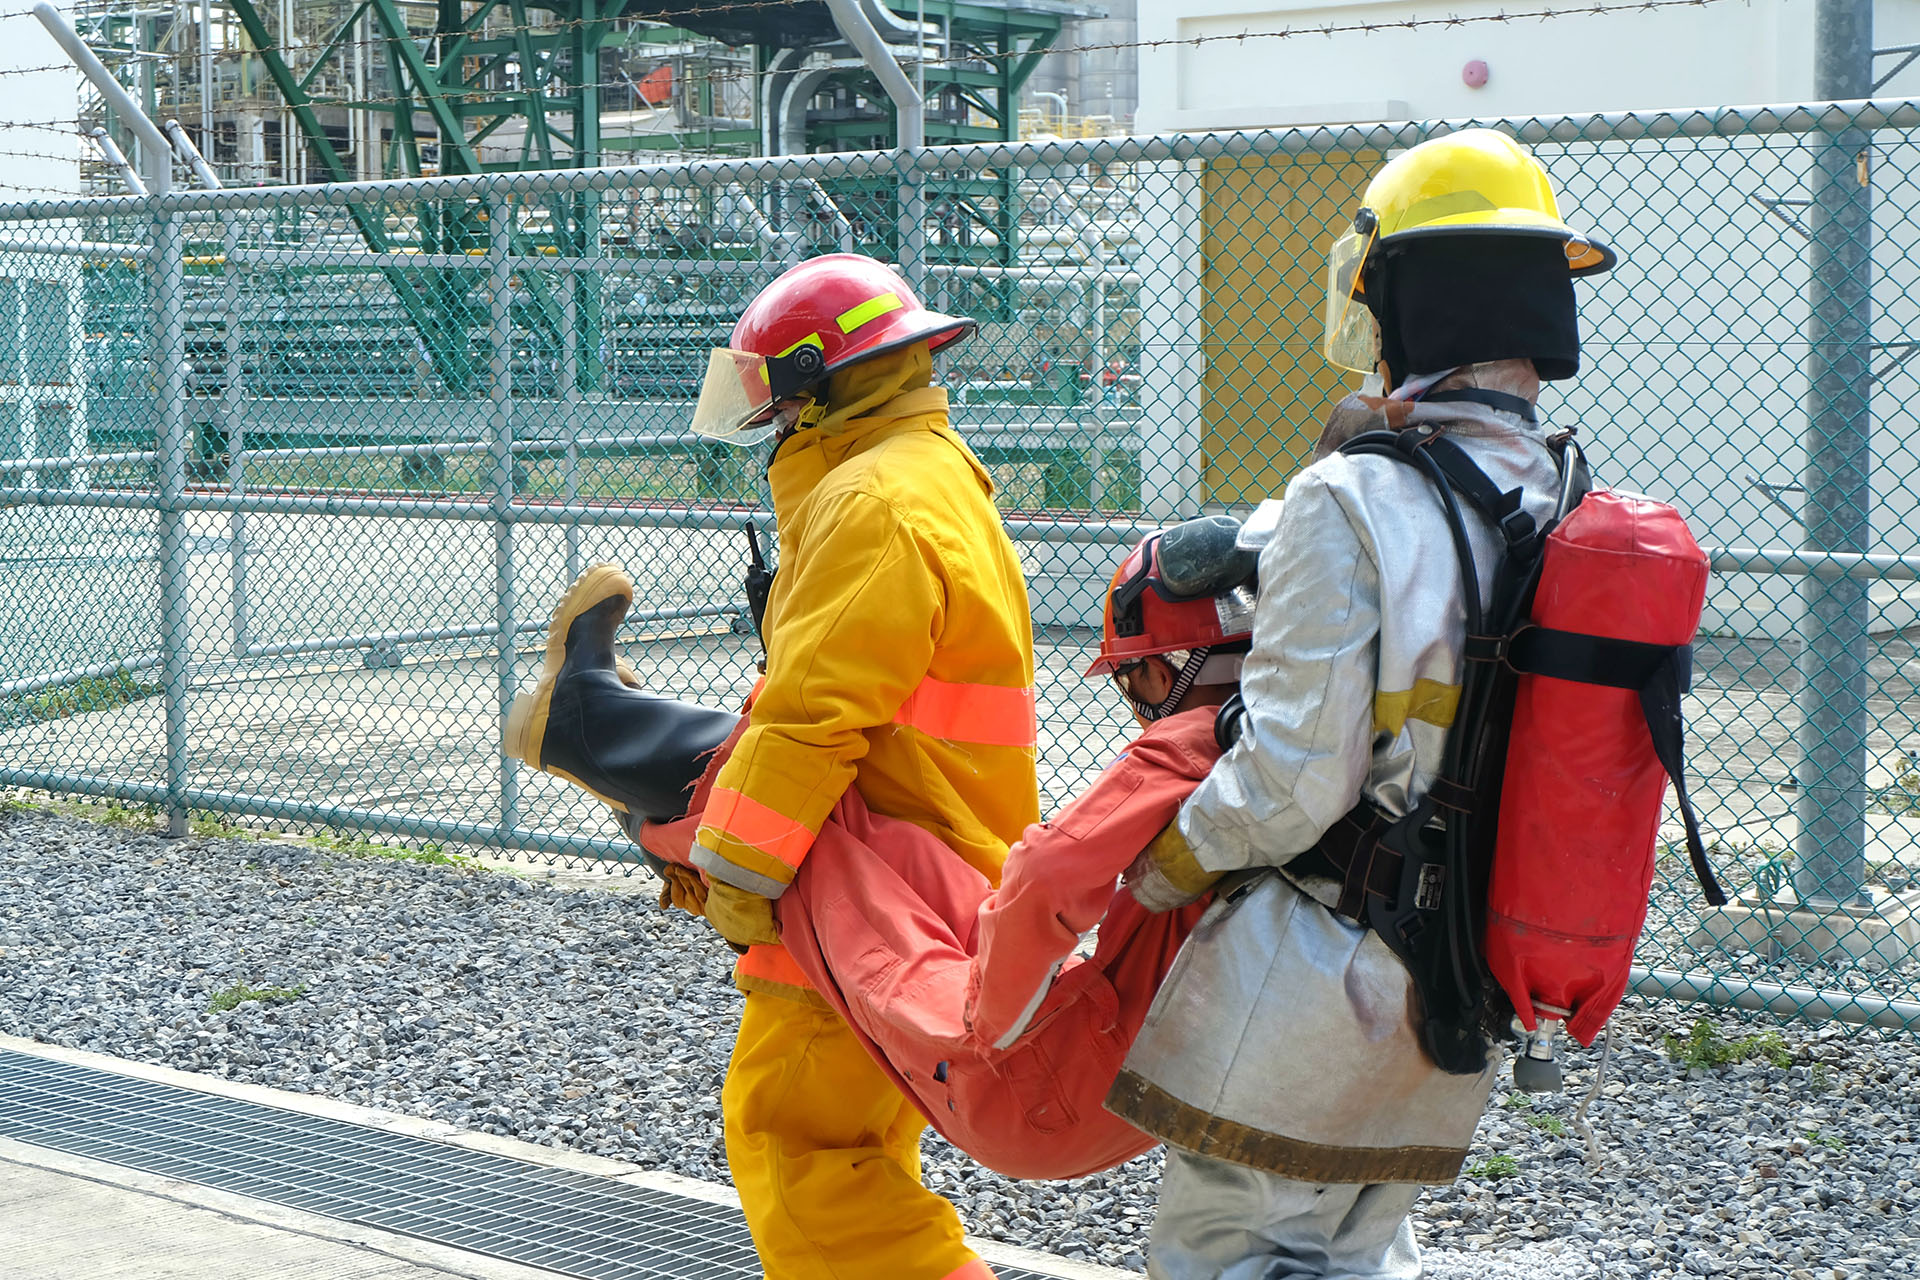 Two fireman are moving patients to a safe area and sending them to the field medical team as part of emergency drills or emergency drill training at a chemical plant oil and gas factory.